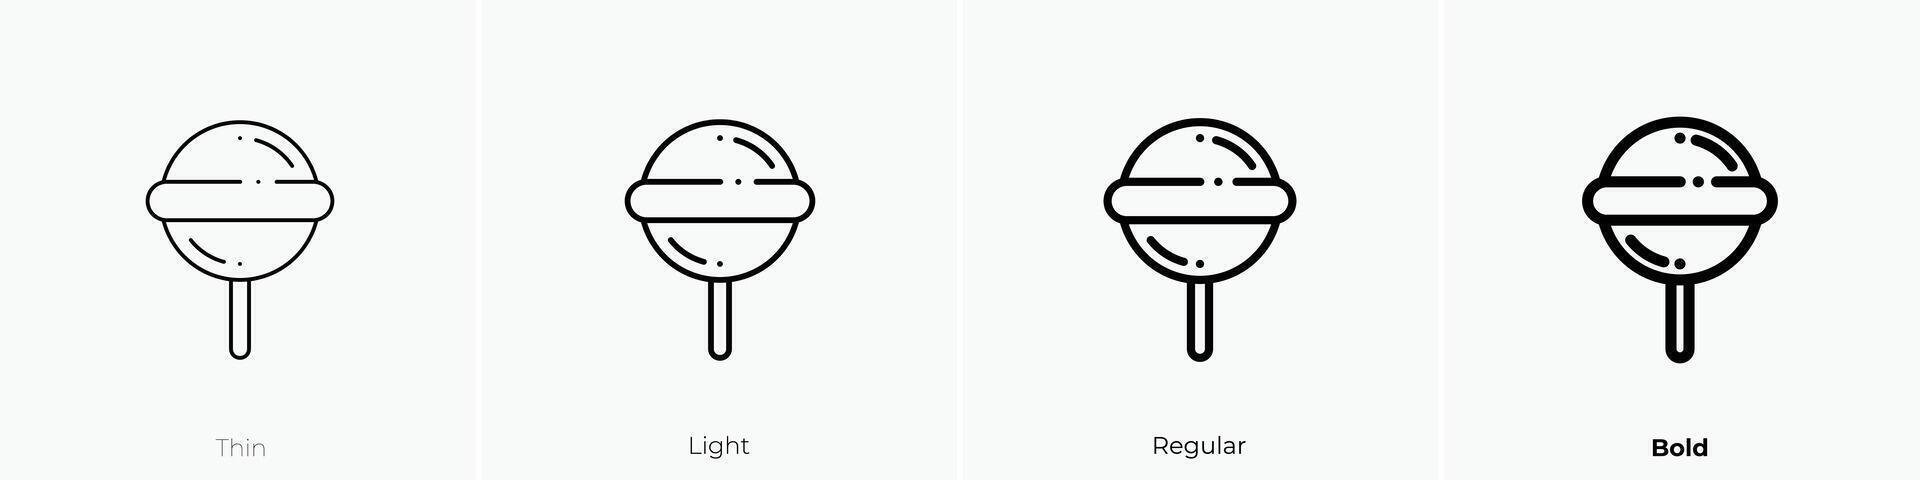 lollipop icon. Thin, Light, Regular And Bold style design isolated on white background vector